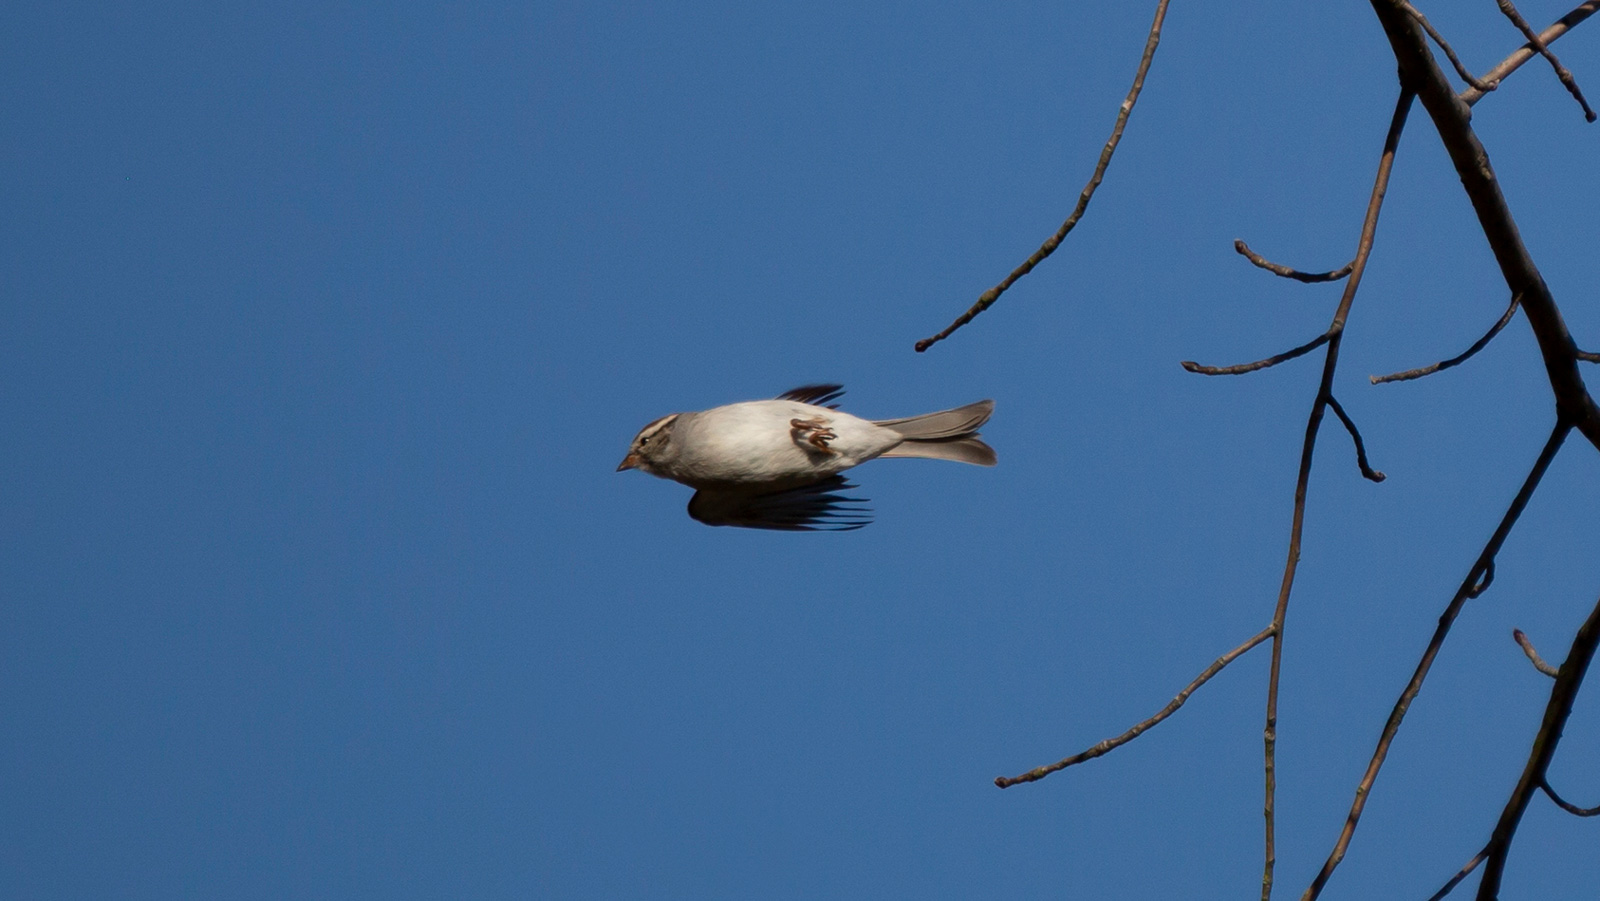 Chipping sparrow flying in blue sky